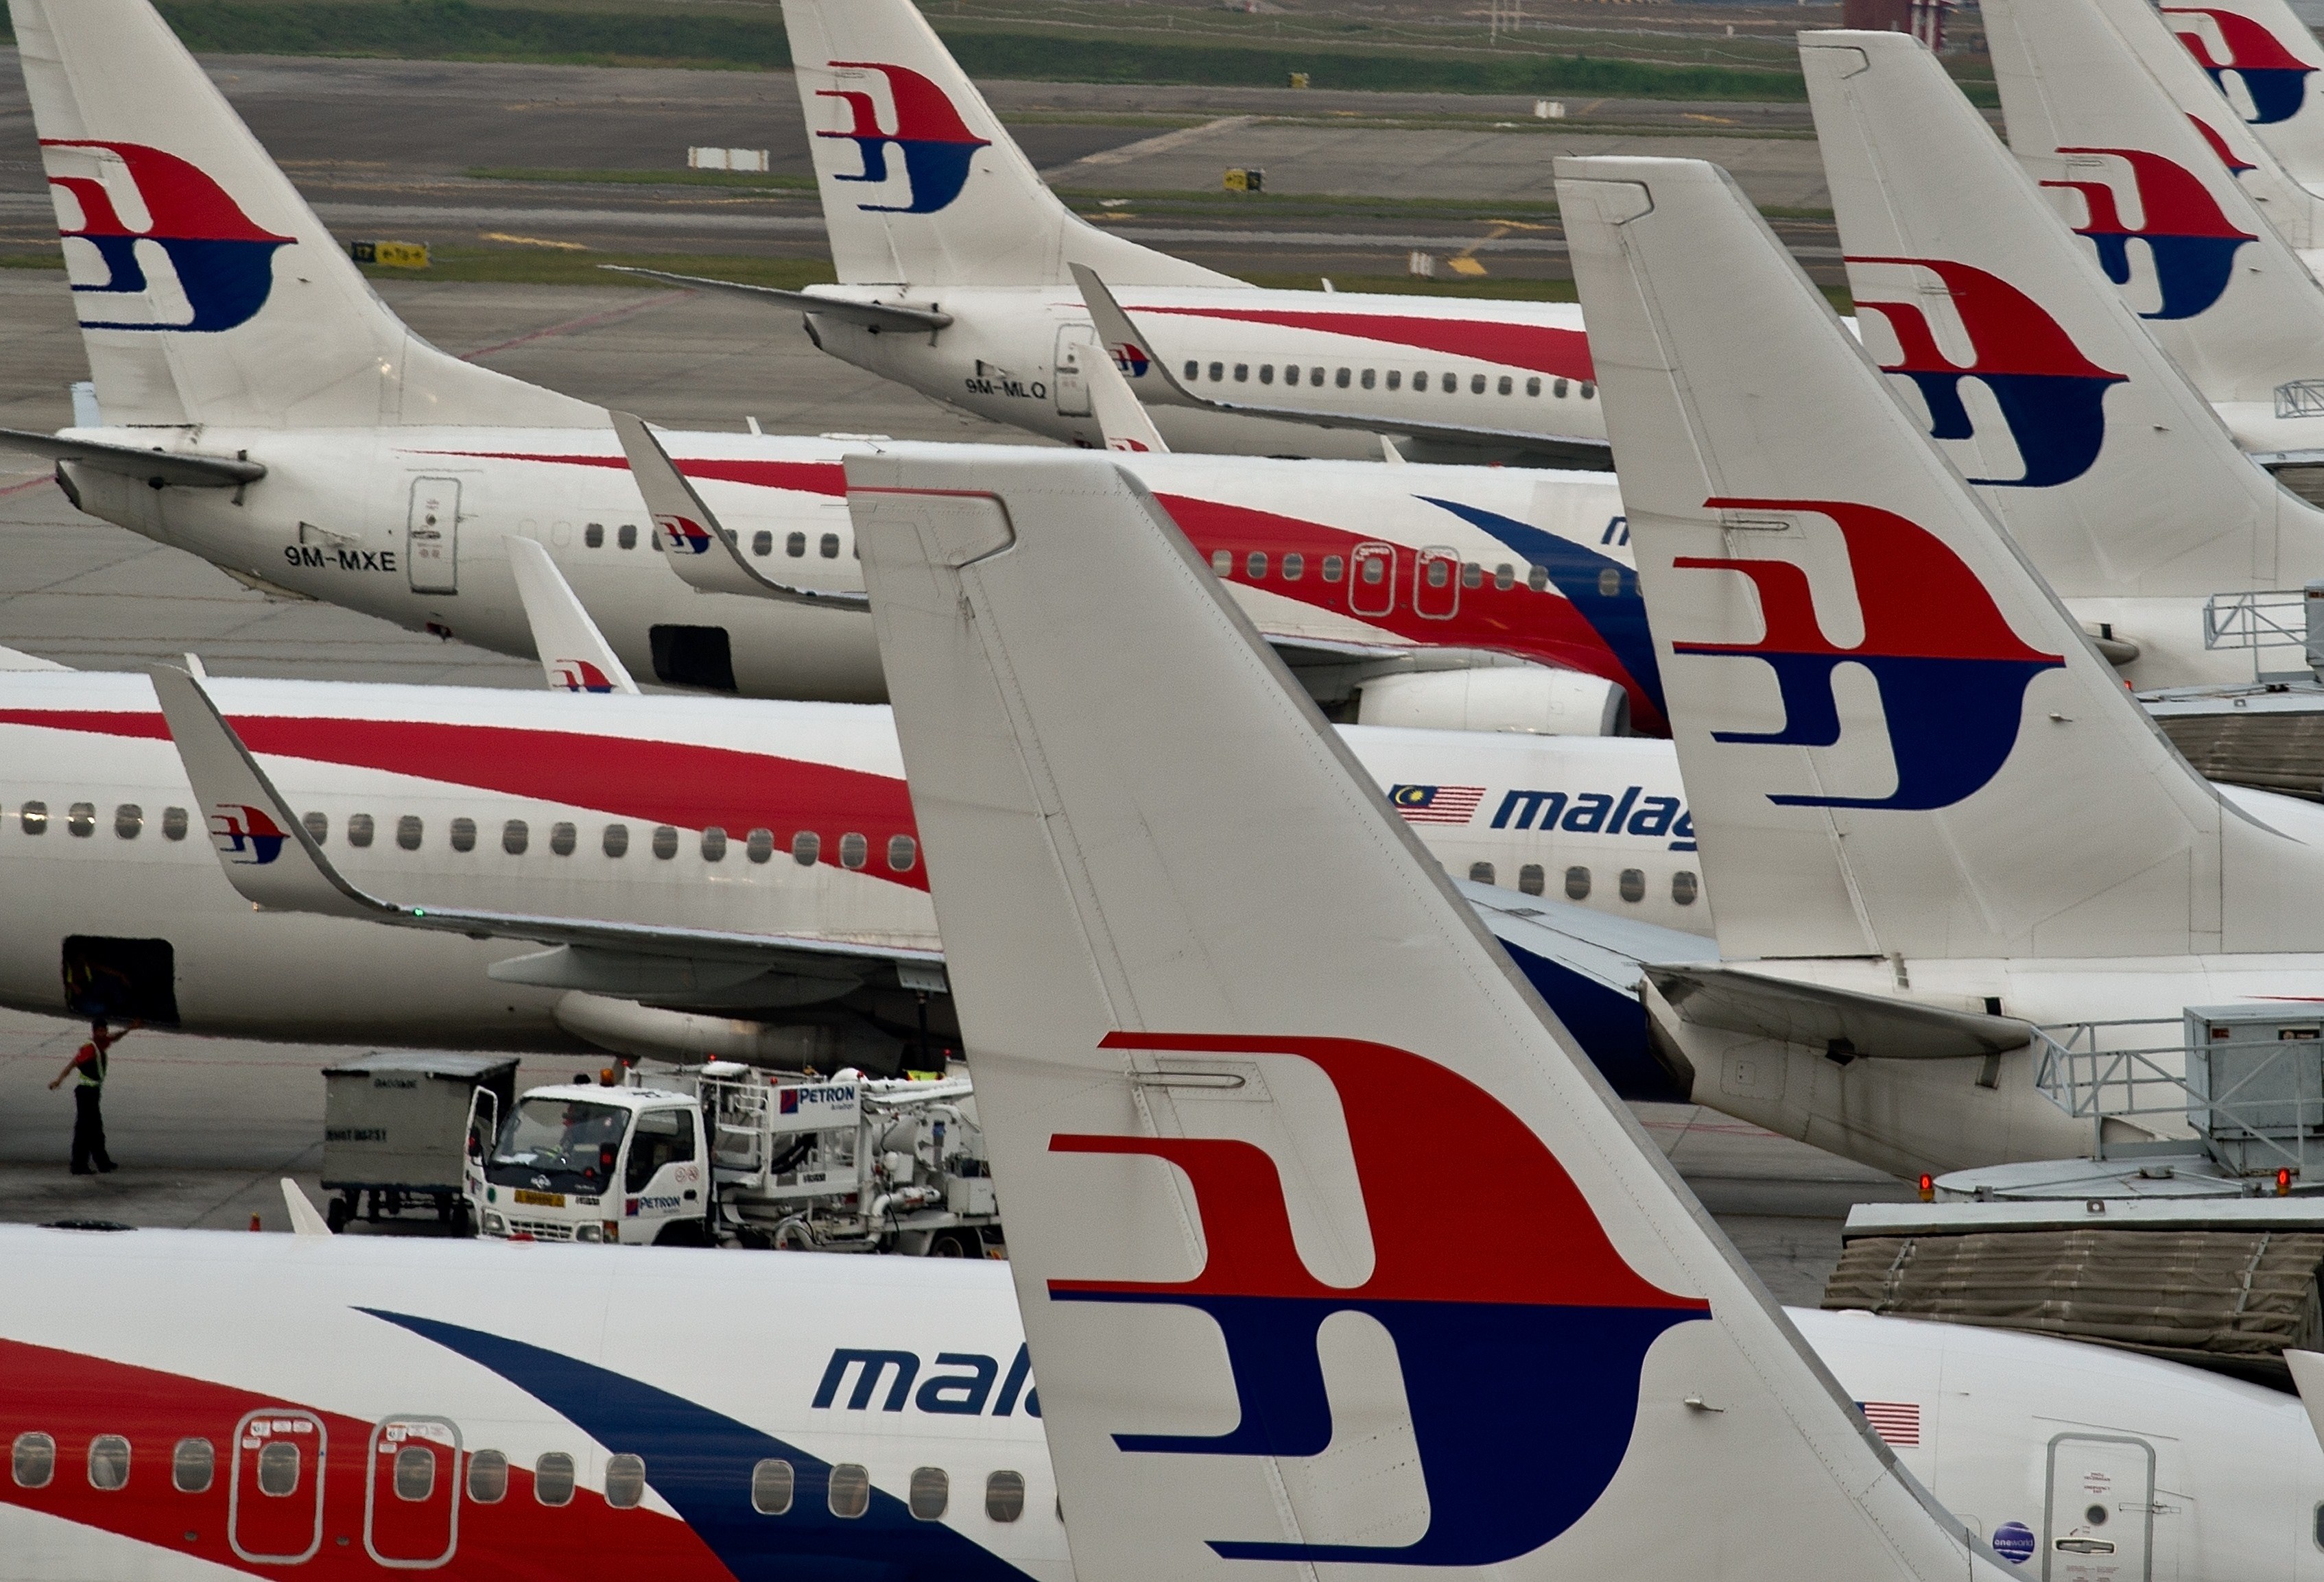 Airport groundstaff walk past Malaysia Airlines planes parked on the tarmac at the Kuala Lumpur International Airport in Sepang on June 17, 2014. (MANAN VATSYAYANA—AFP/Getty Images)